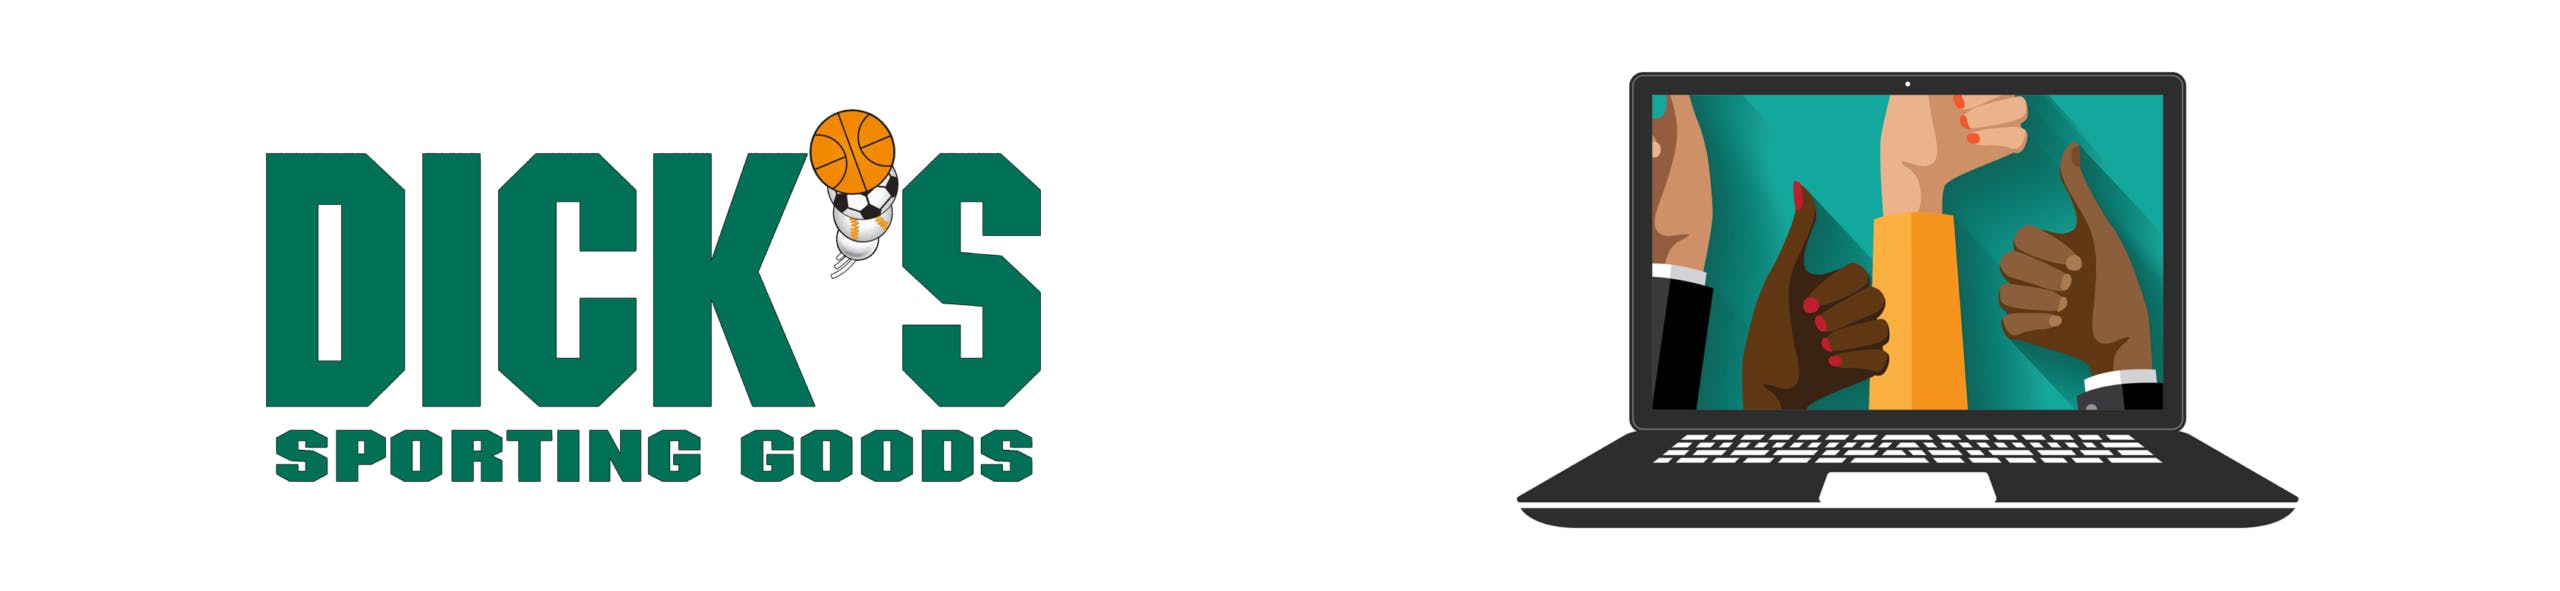 Dick's Sporting Goods logo next to a laptop with thumbs pointing up